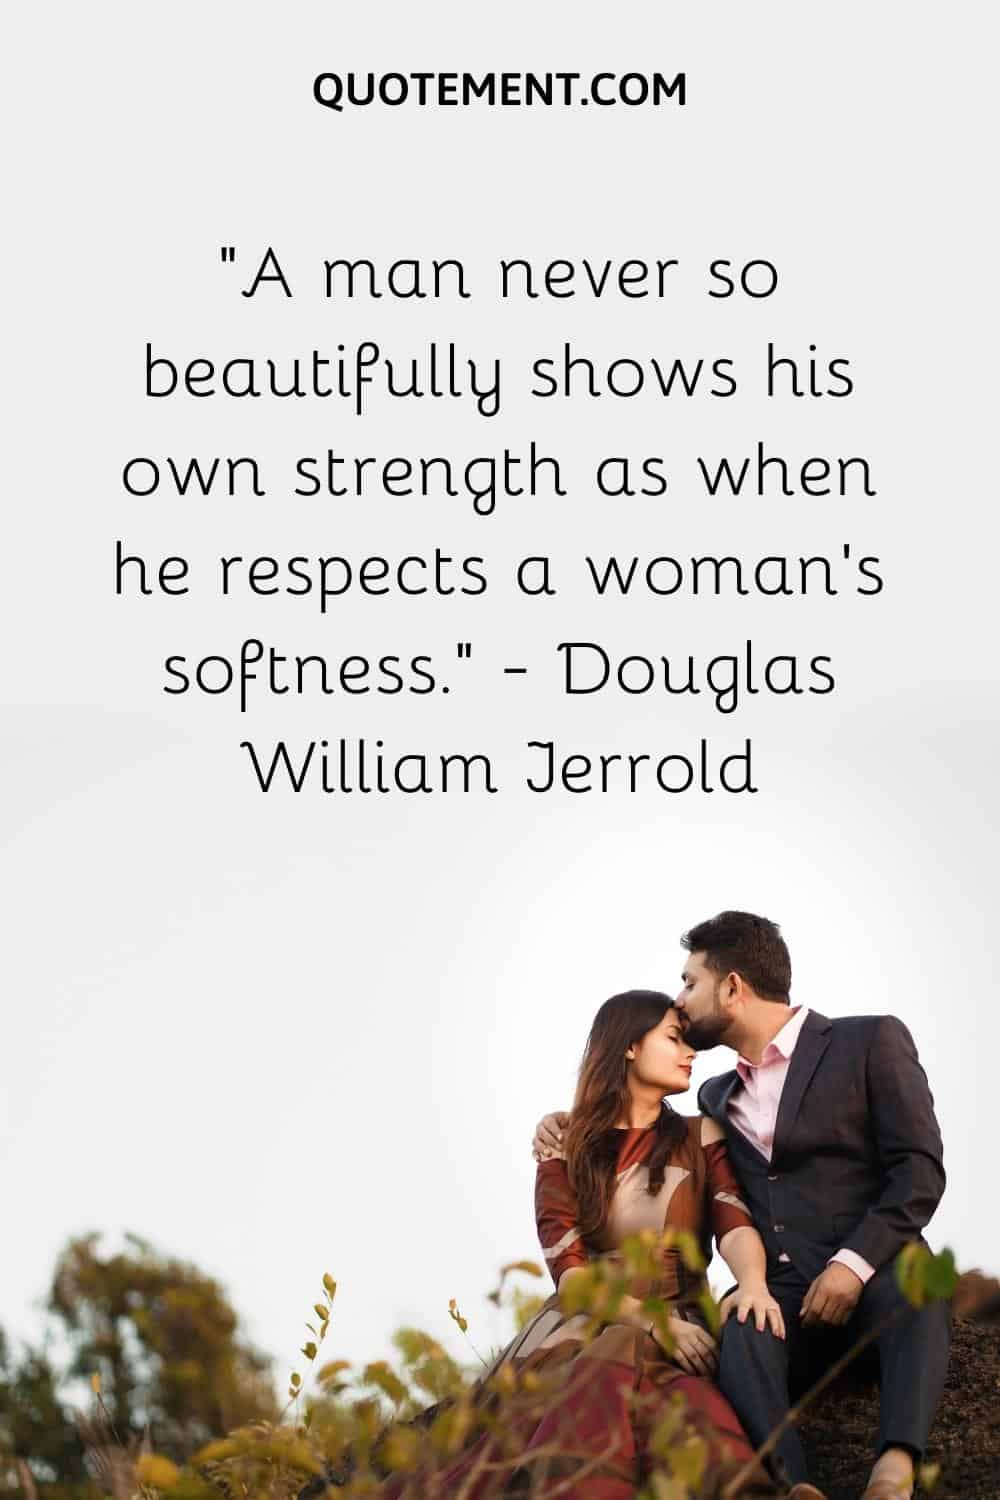 A man never so beautifully shows his own strength as when he respects a woman’s softness